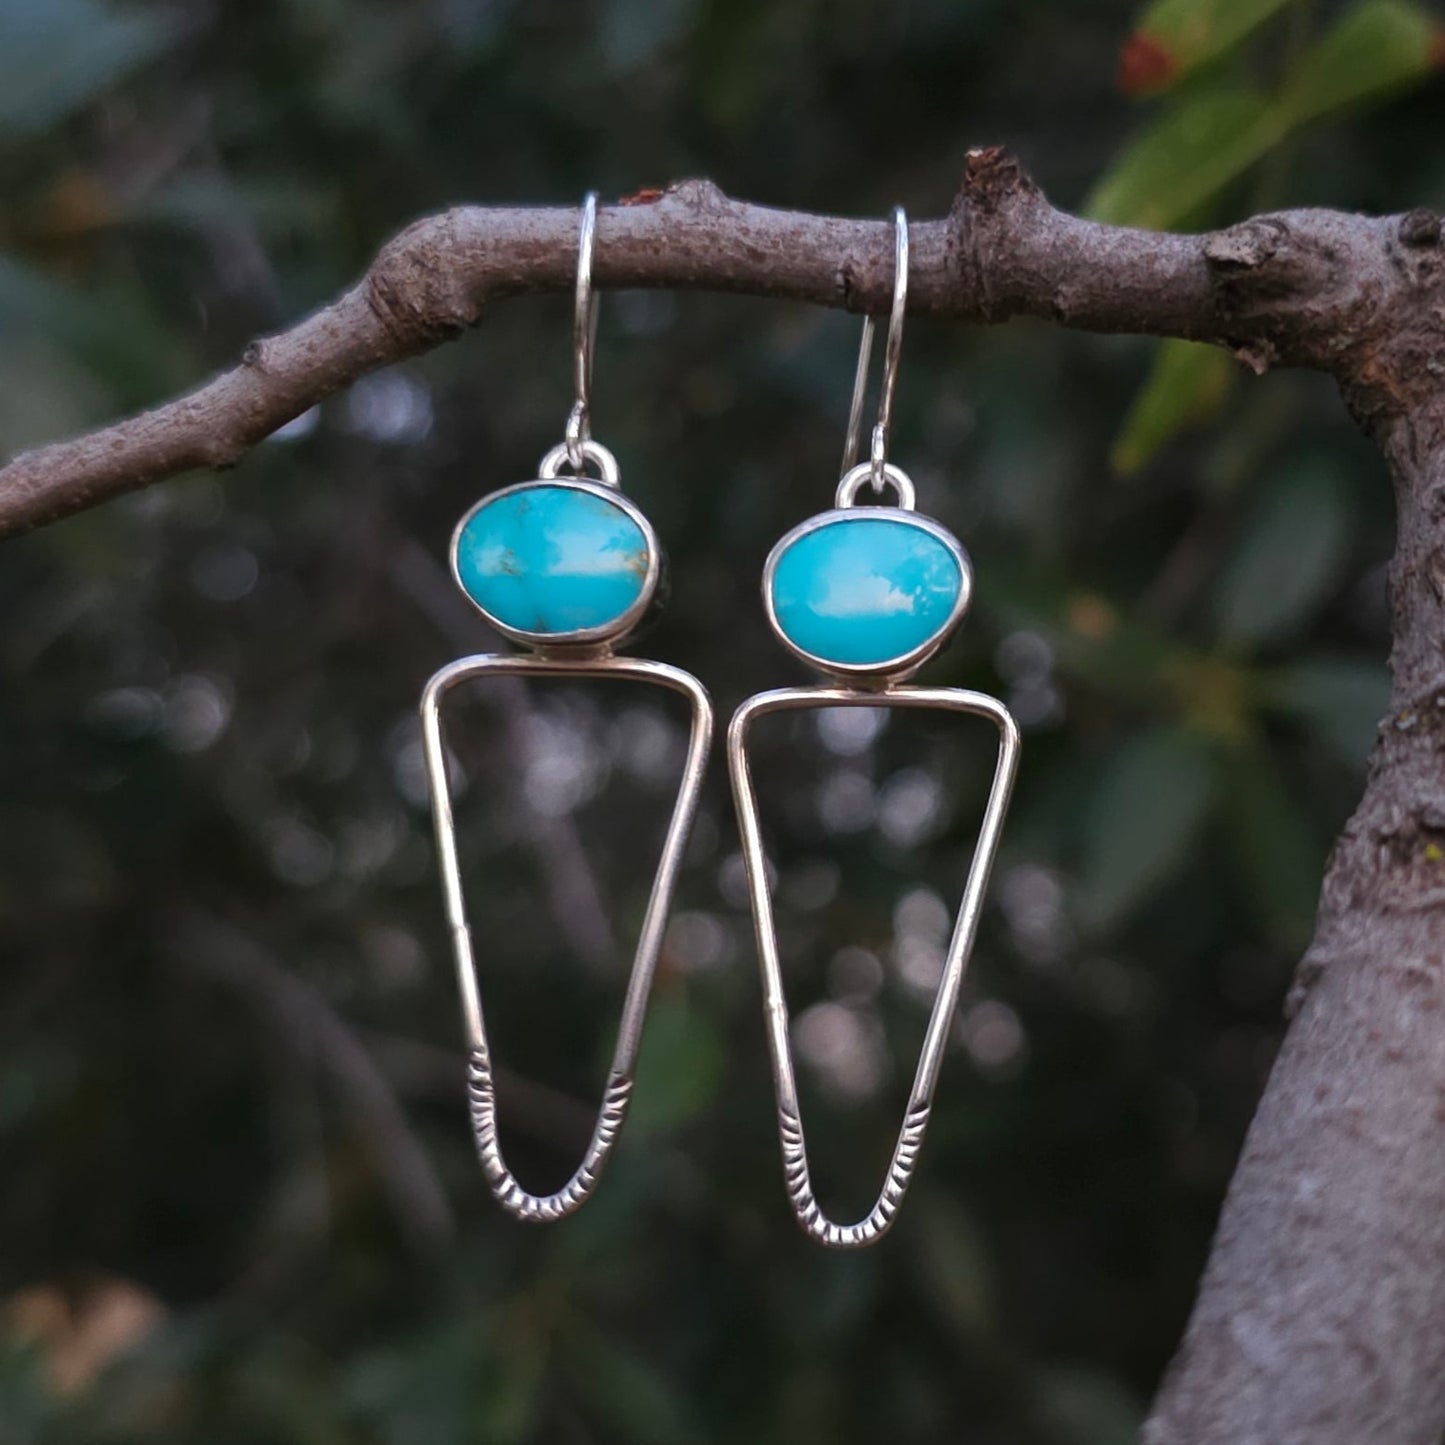 Stamped Elongated Triangle Sterling Silver Earrings with Kingman Turquoise Stone